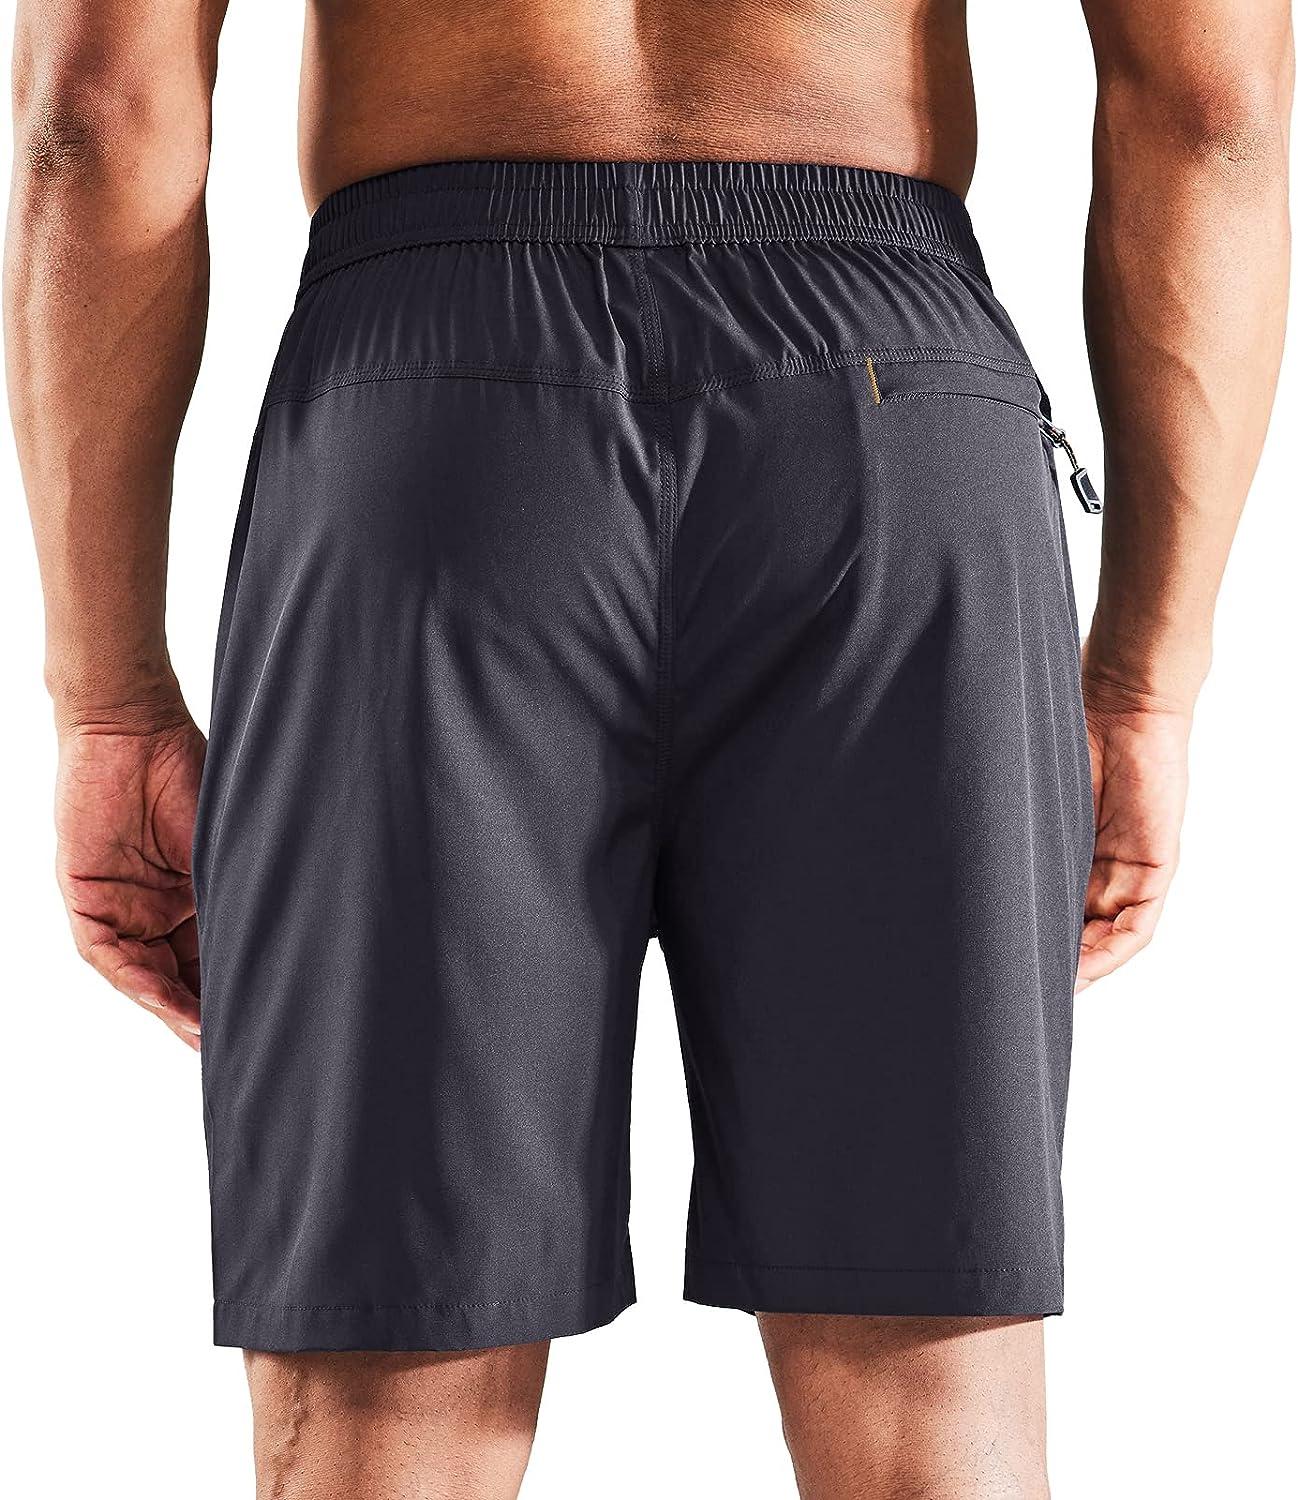  MIER Men's Quick Dry Running Shorts with Zipper